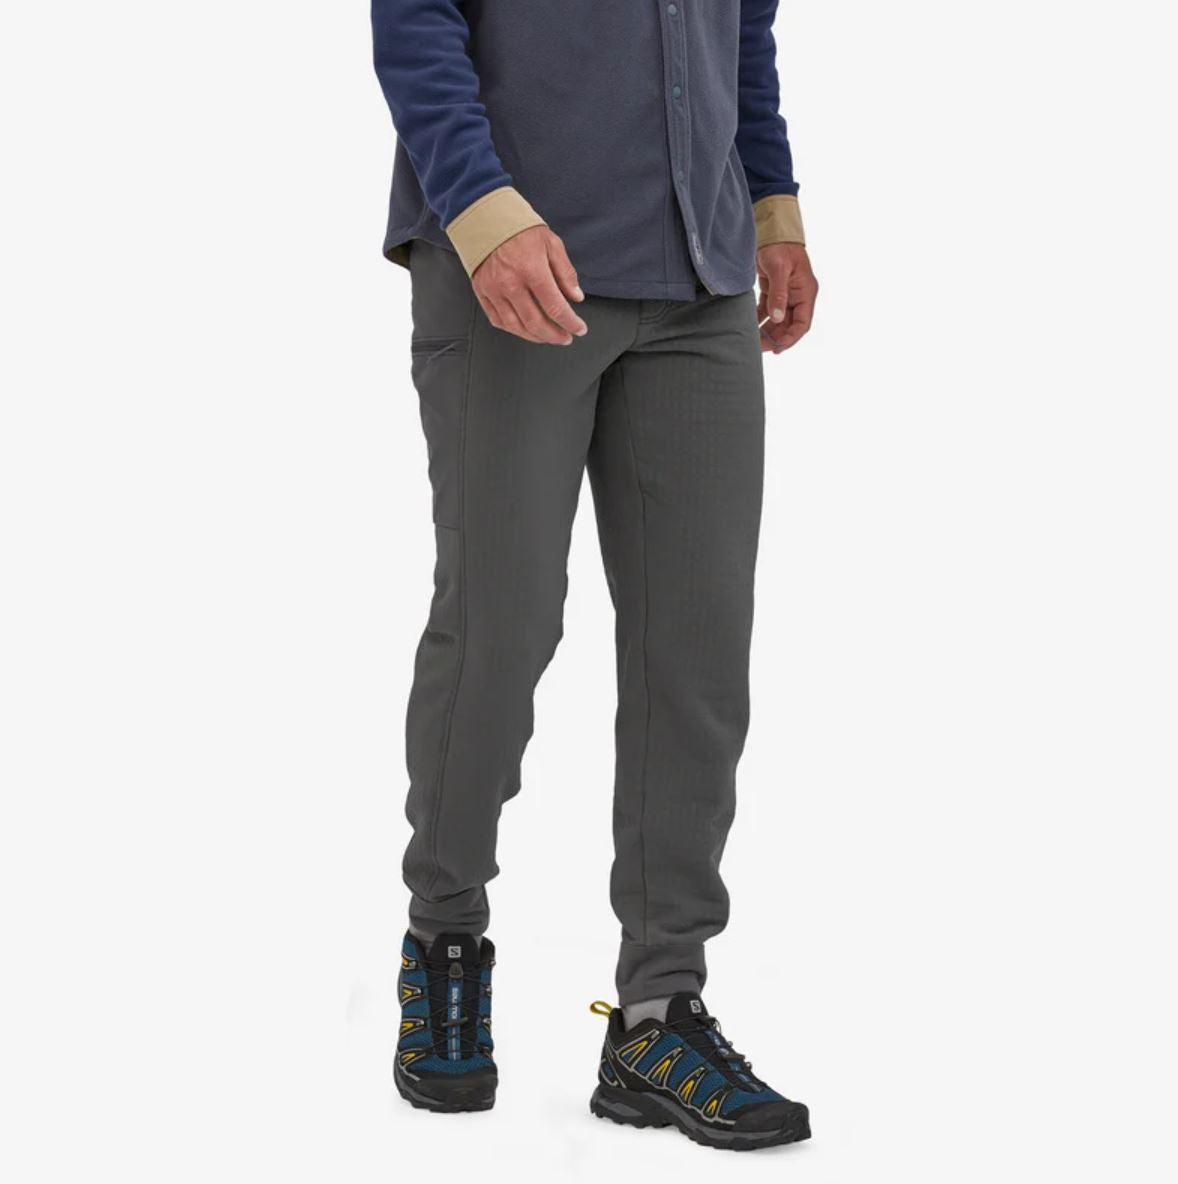 patagonia mens r2 techface pants in forge grey, front view on a model